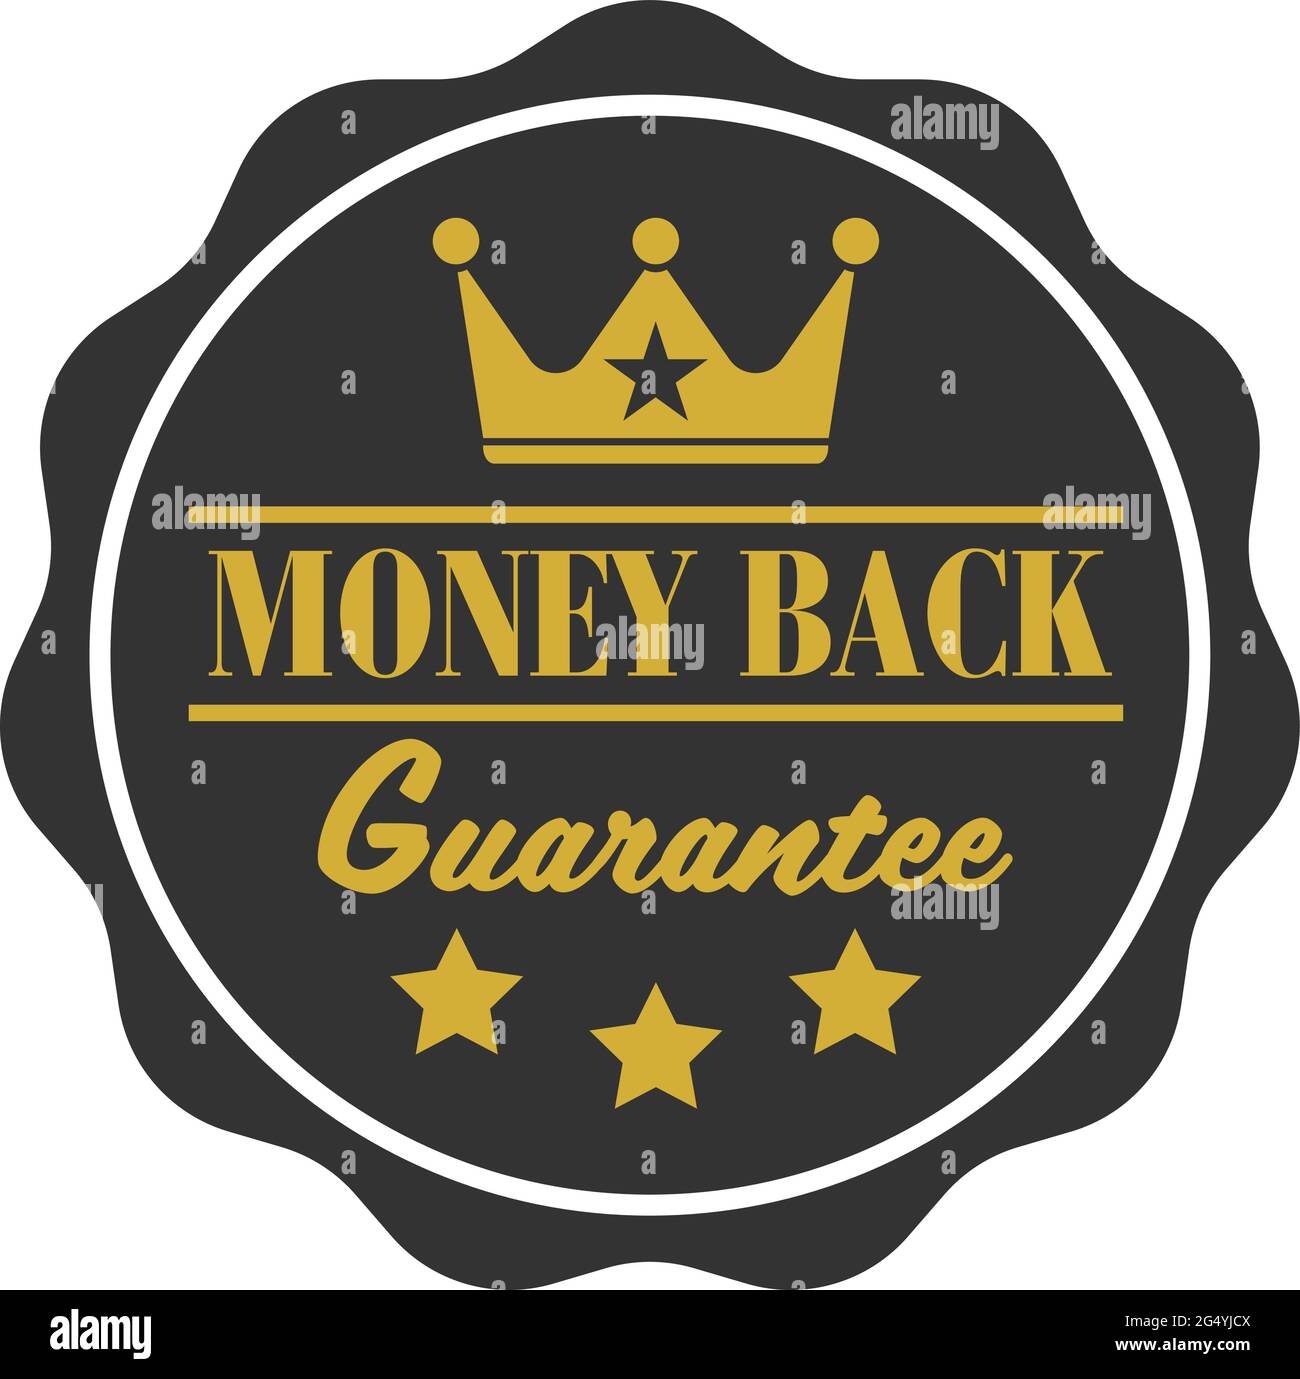 gold colored MONEY BACK GUARANTEE label or badge with crown symbol, vector illustration Stock Vector